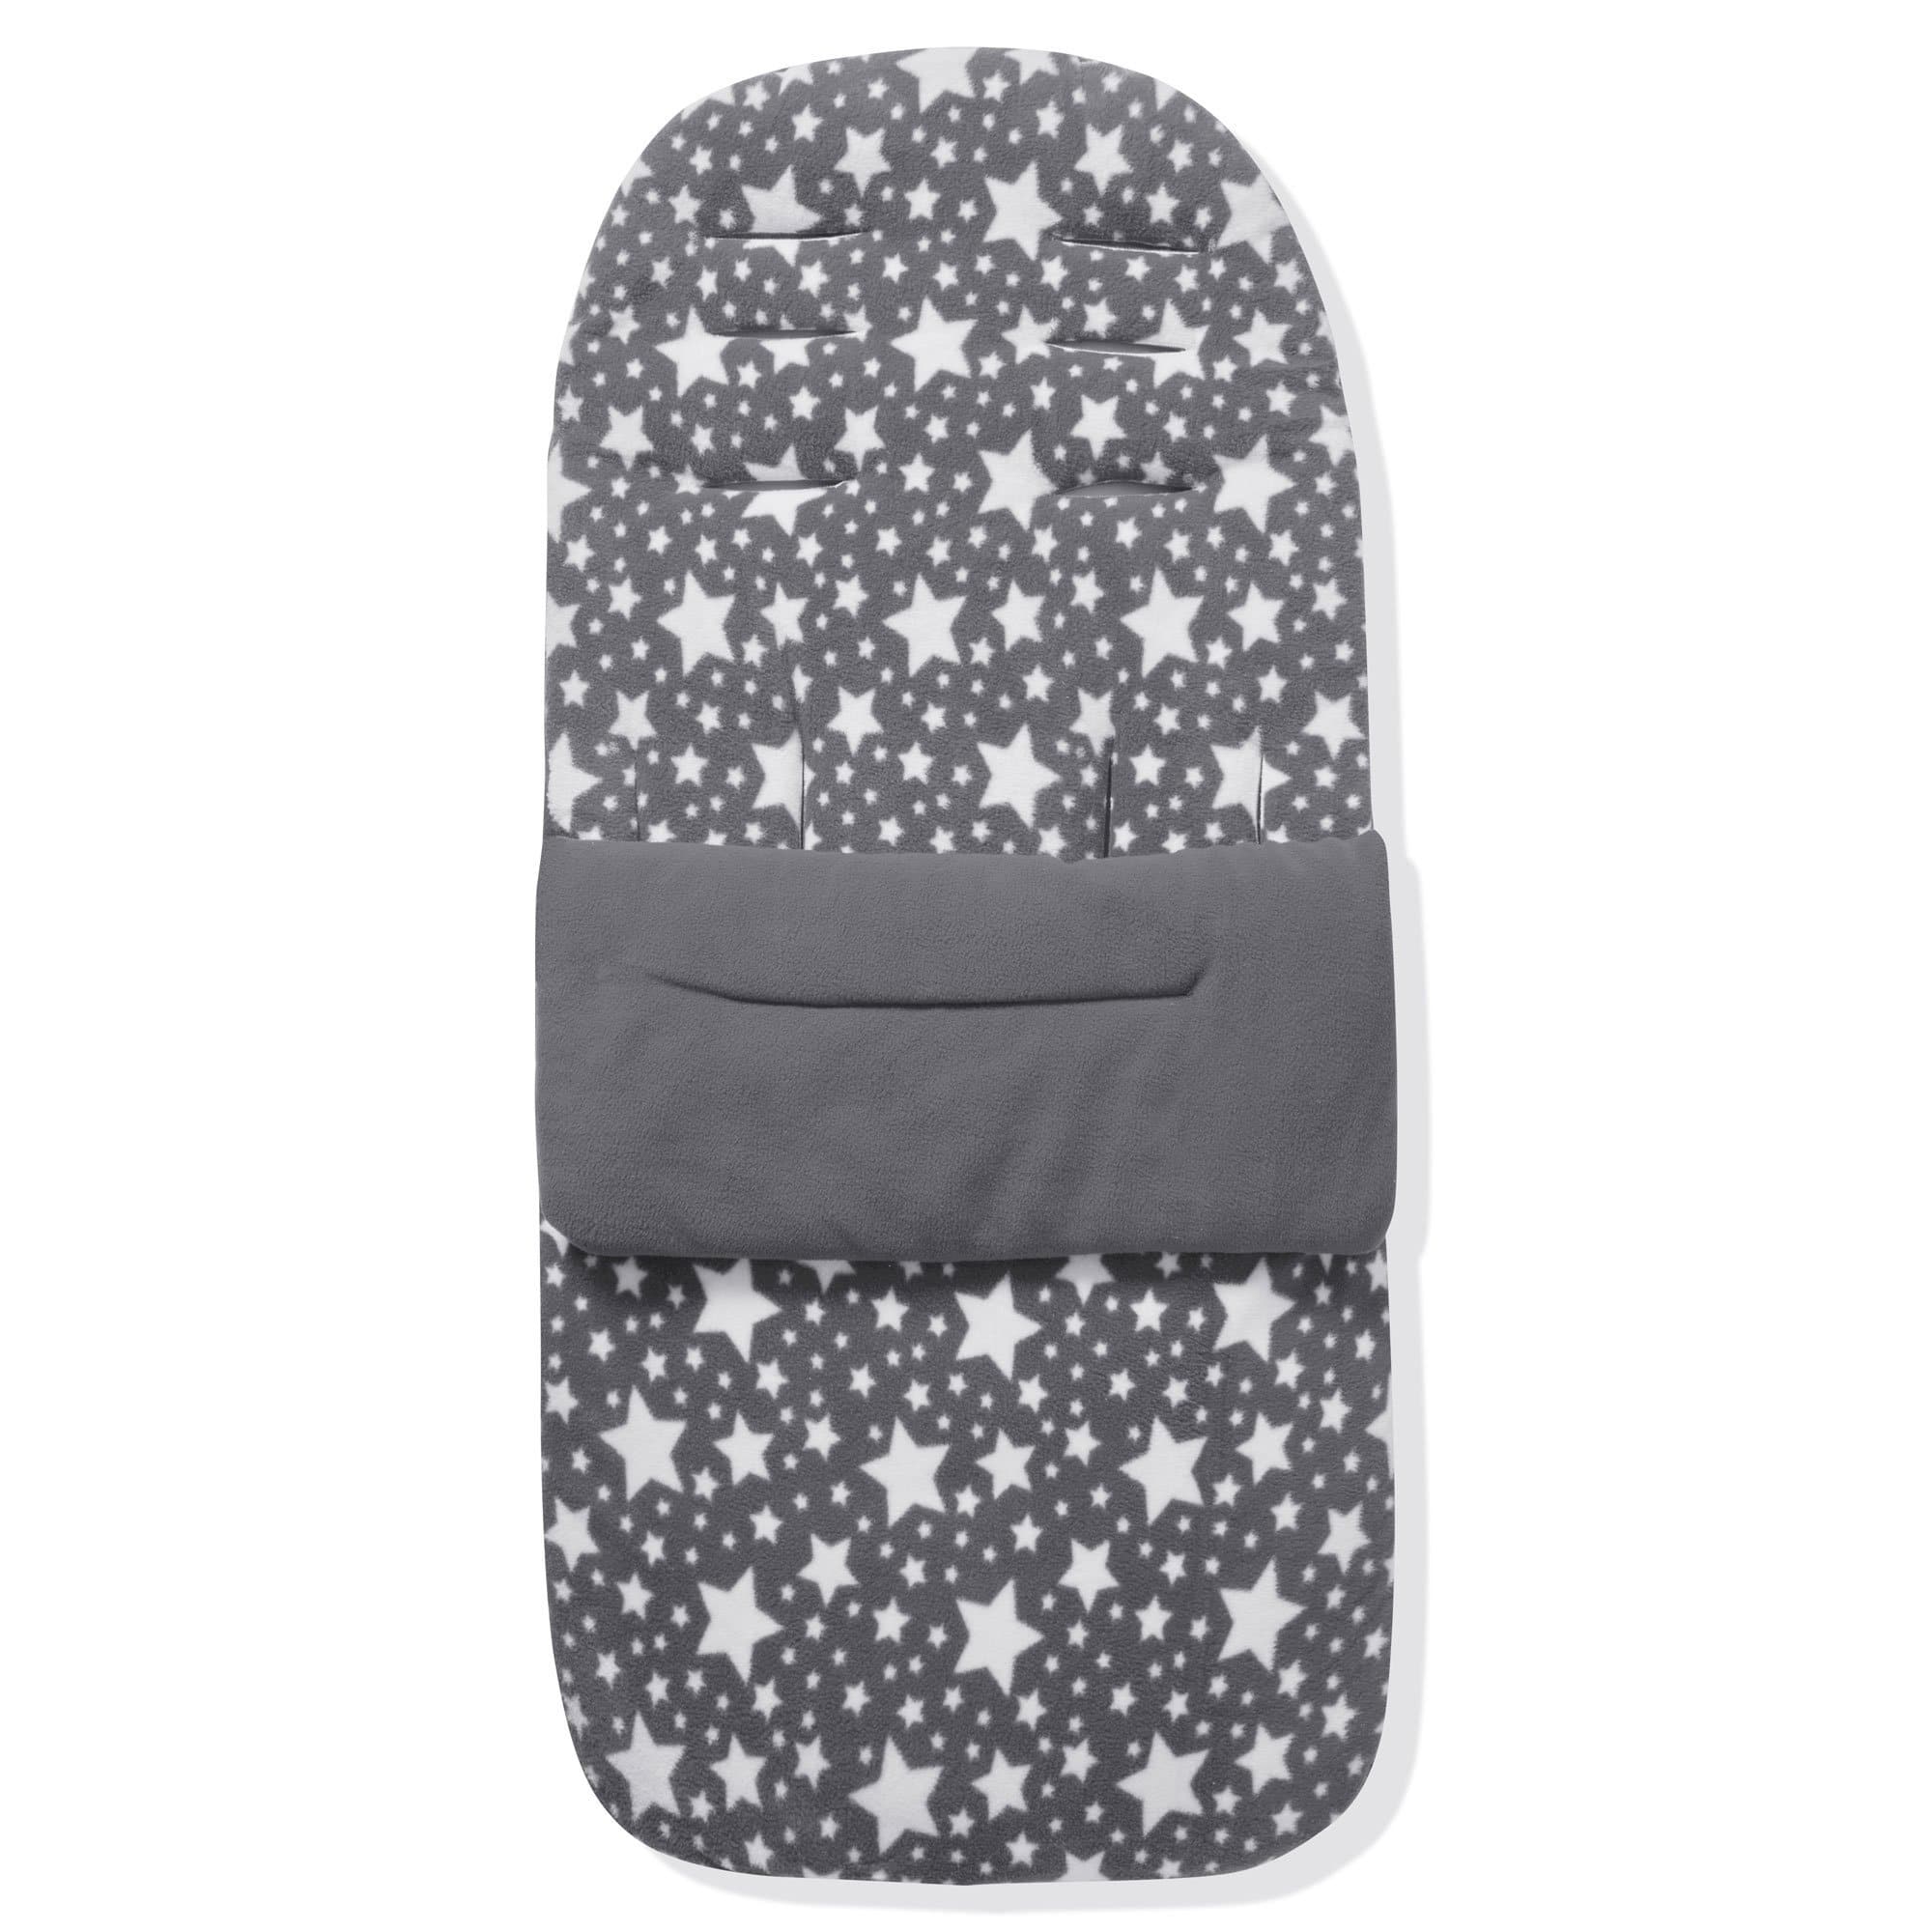 Fleece Footmuff / Cosy Toes Compatible With Baby Trend - Grey Star / Fits All Models | For Your Little One